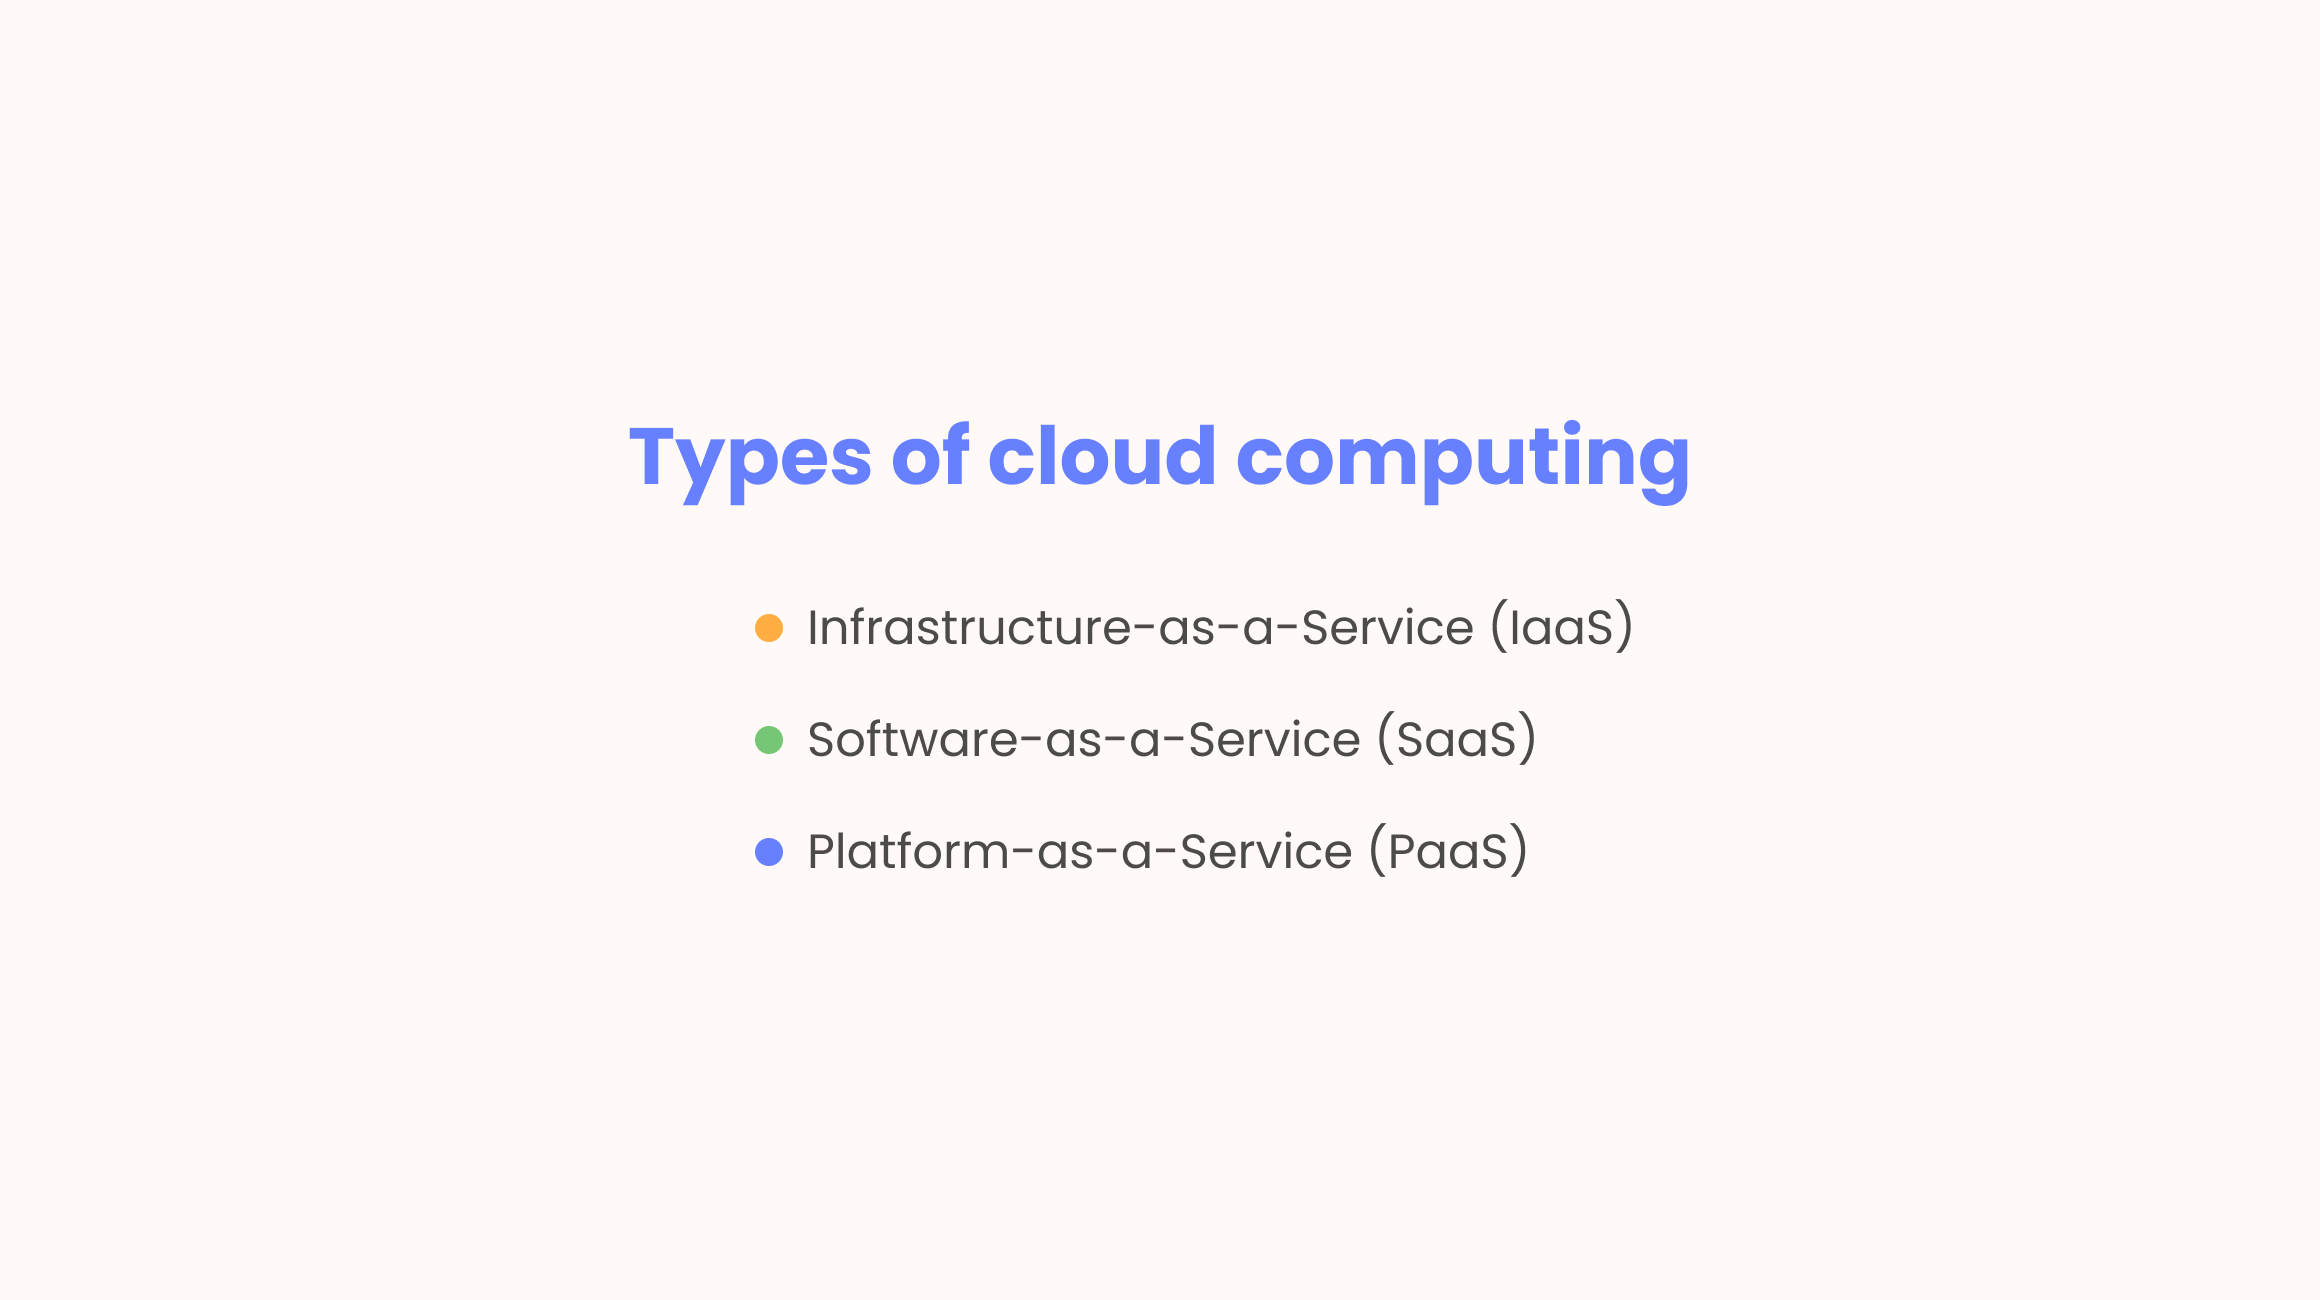 Types of Cloud Application Services